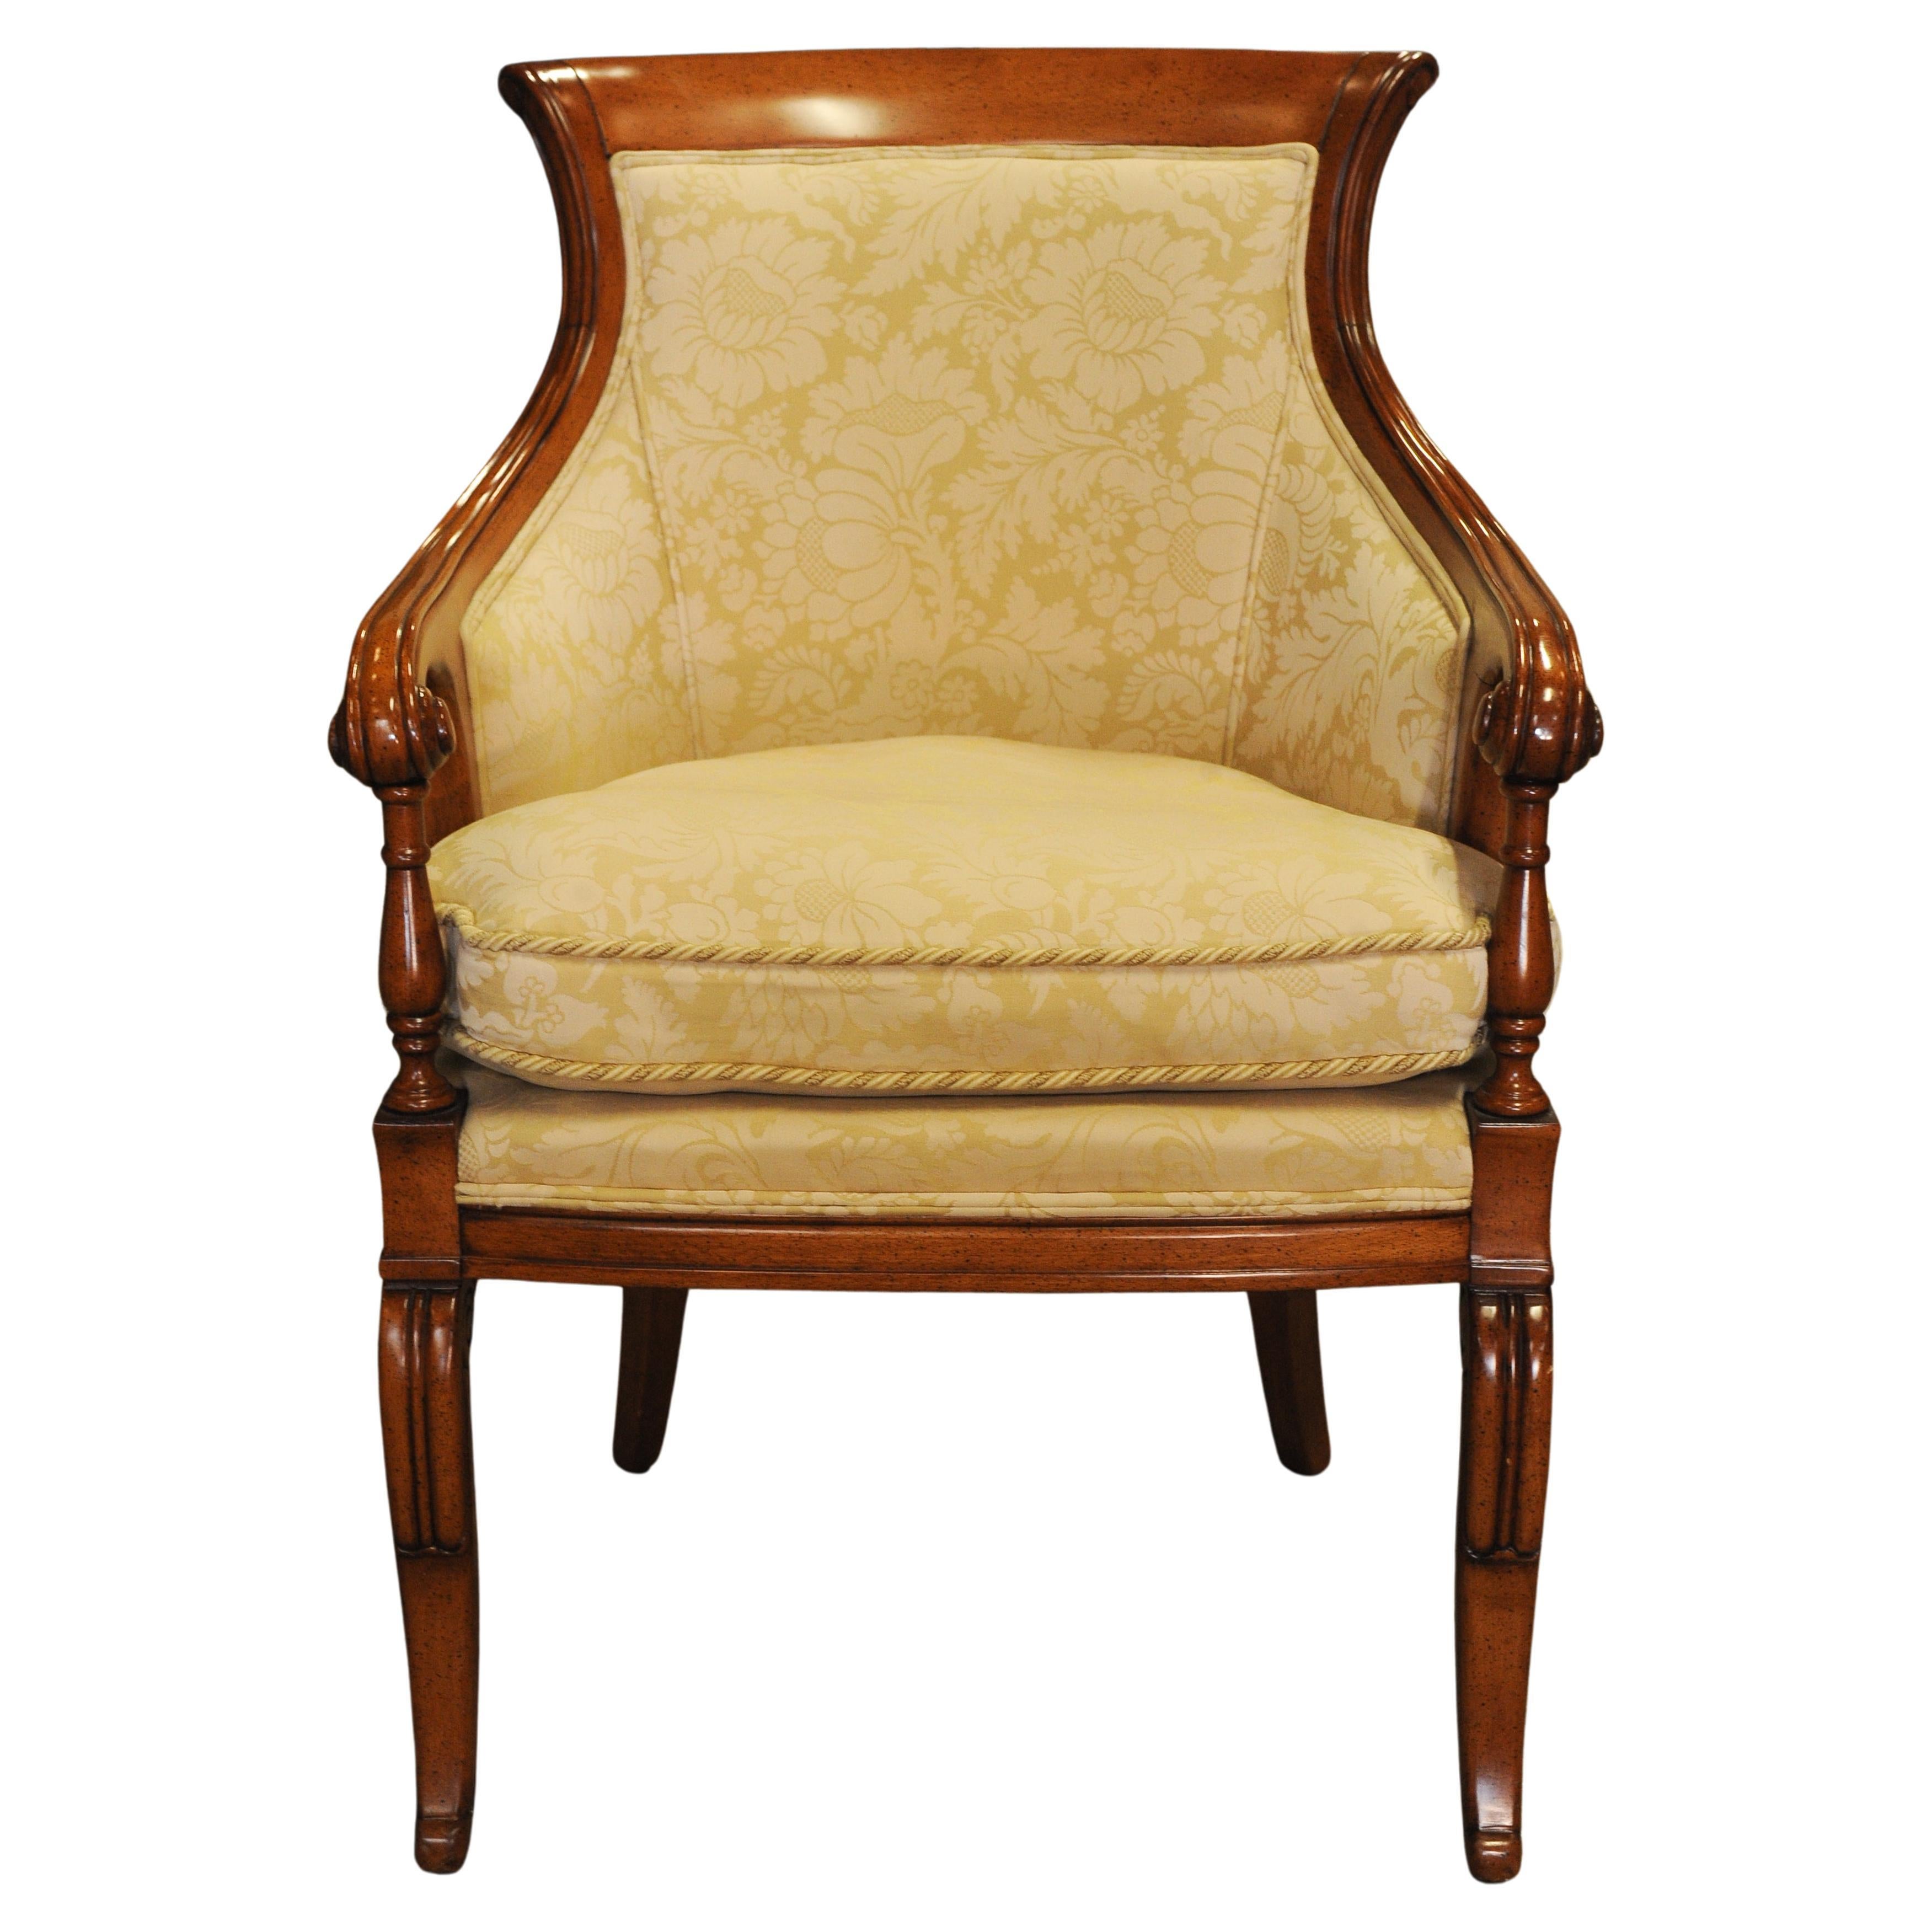 Elegant Pair of William IV Design Bergere Armchairs With Cream Damask Upholstery For Sale 4